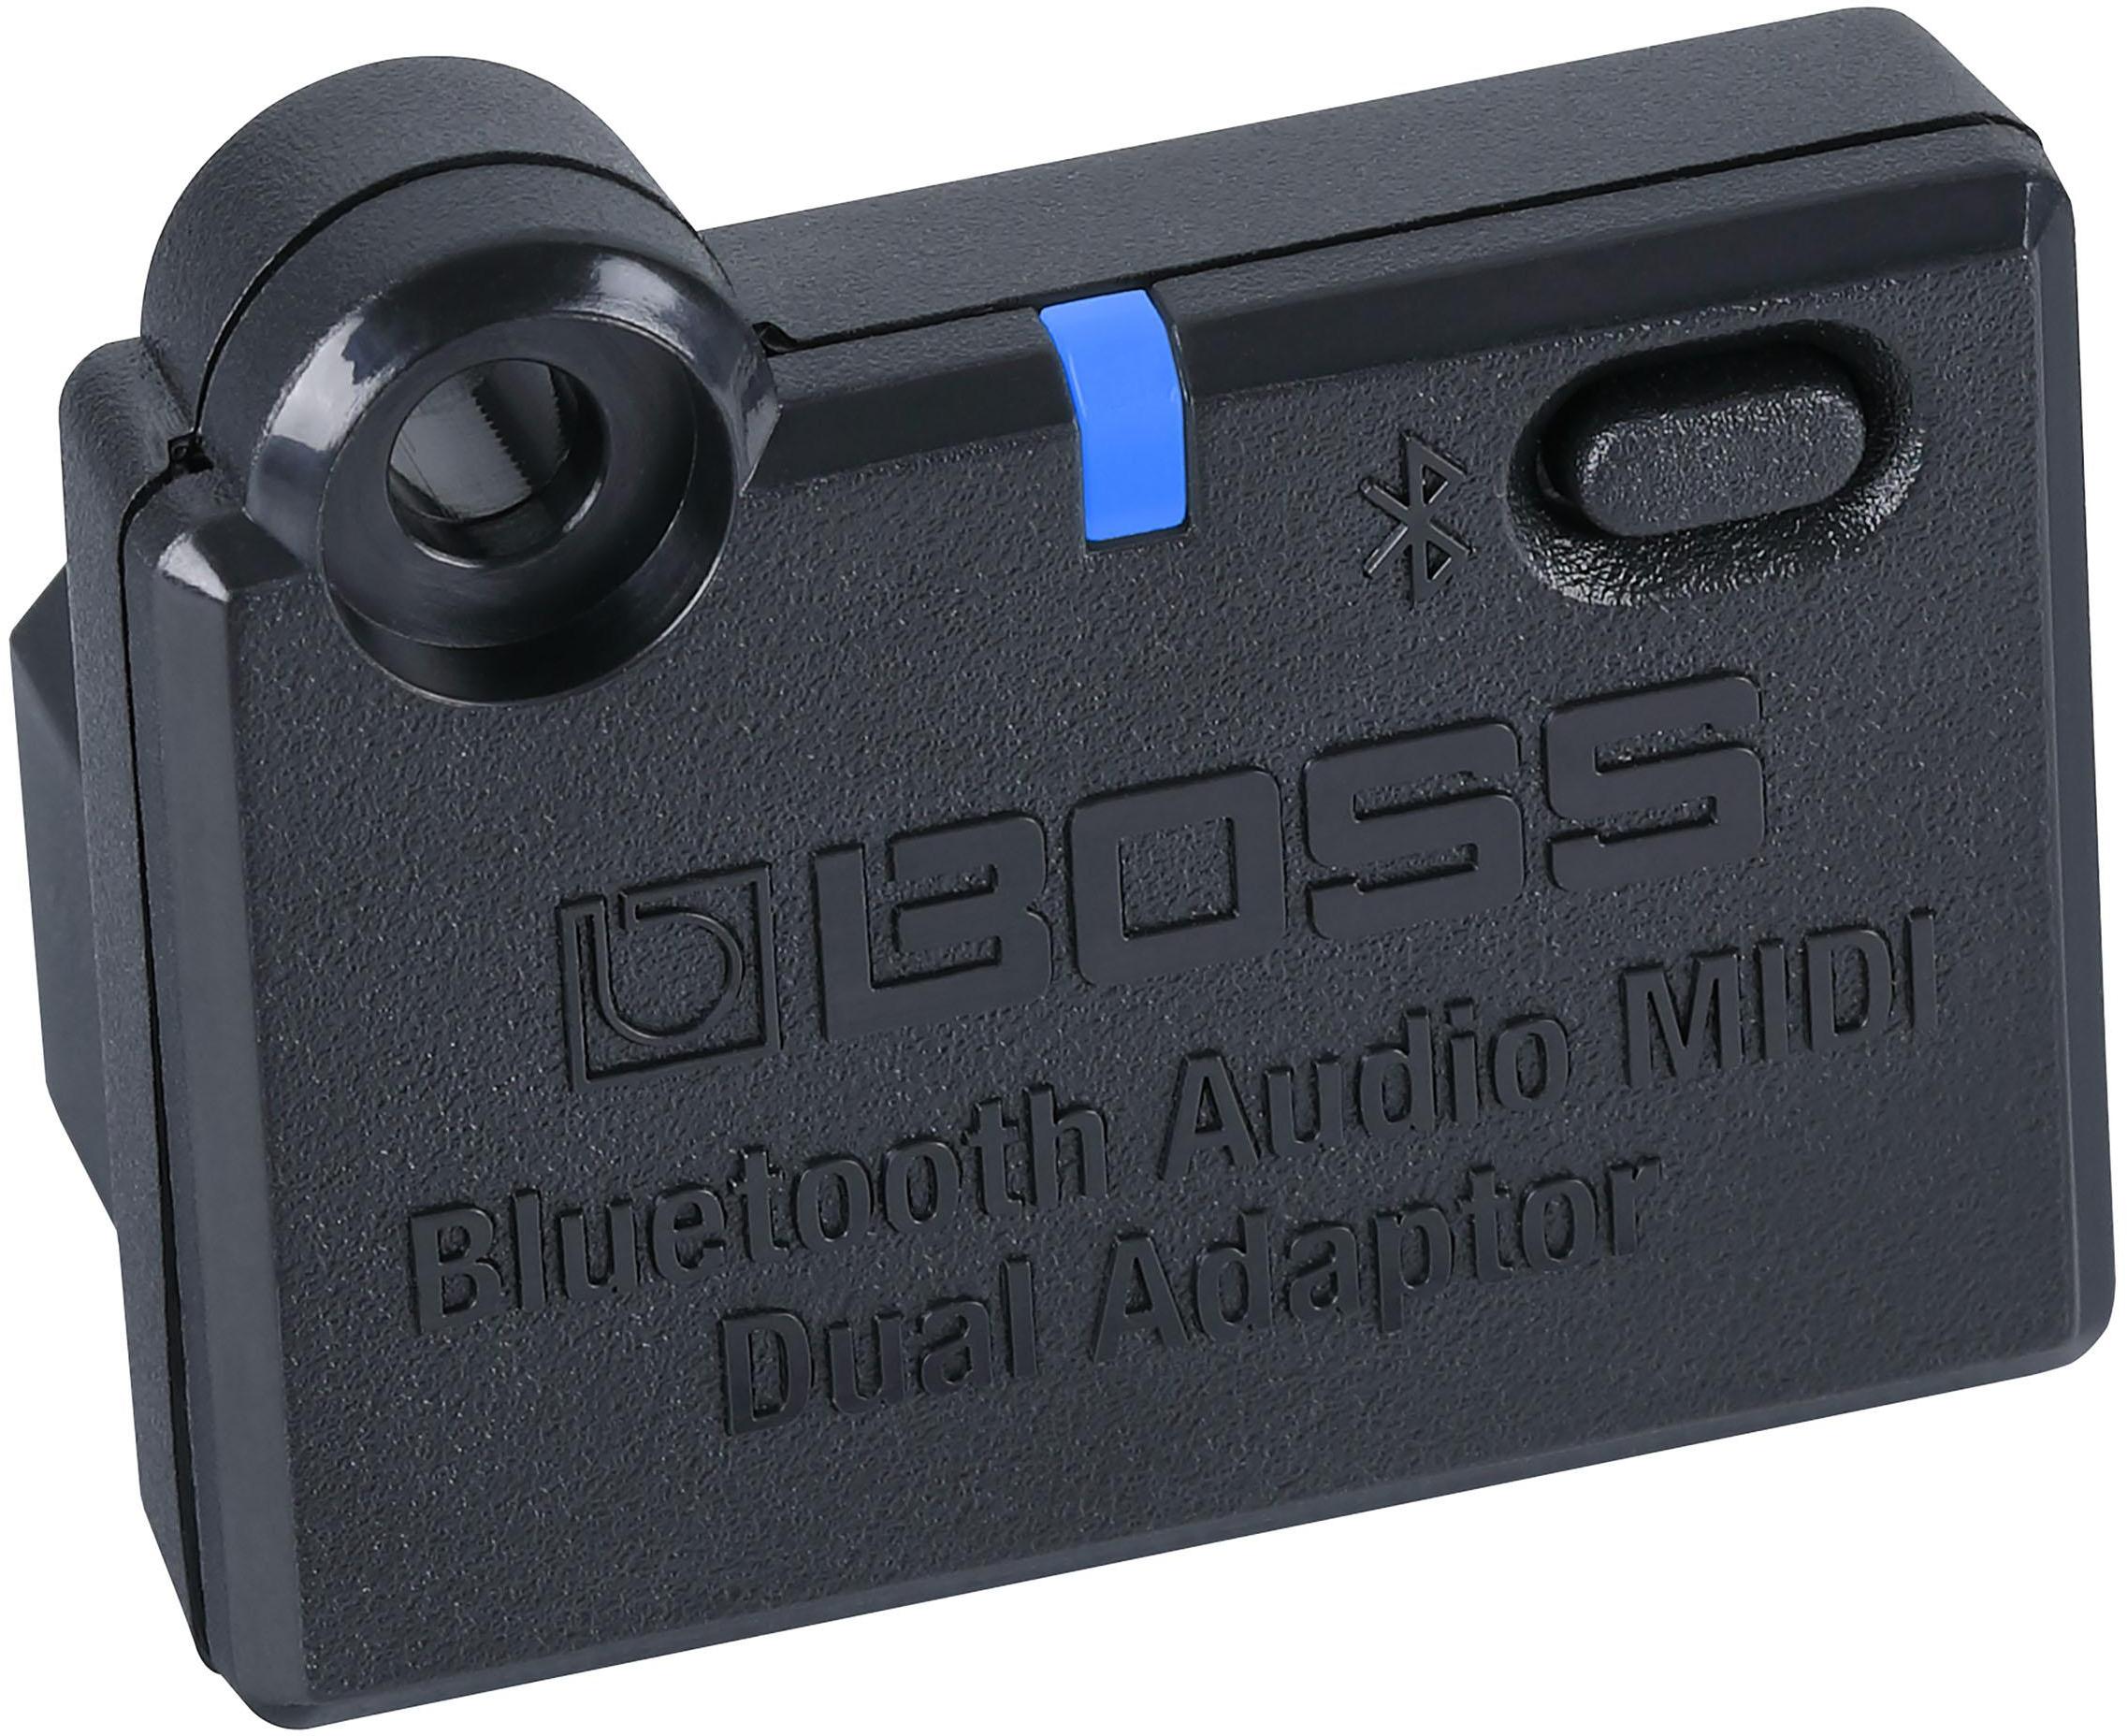 More access for guitar effects Boss BLUETOOTH AUDIO ADAPTATOR